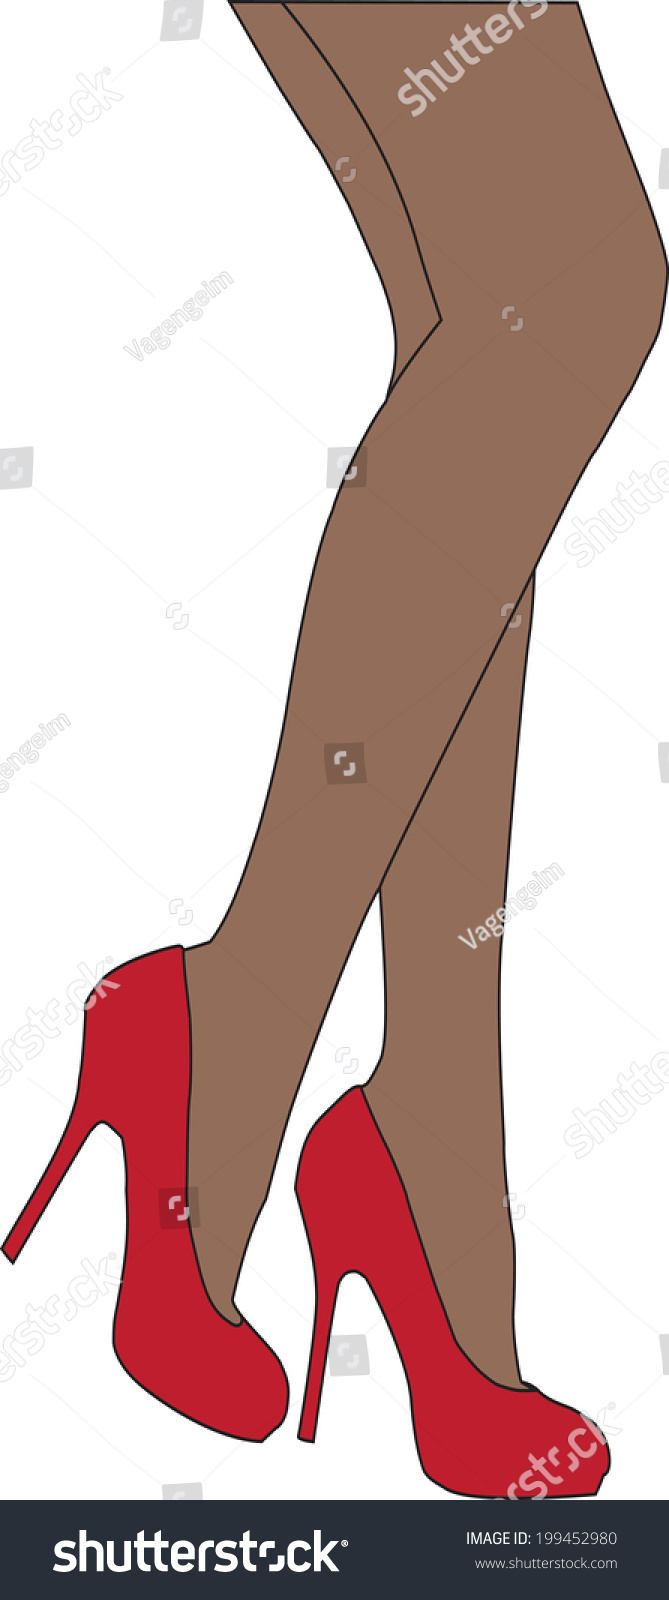 Female Legs In Shoes Isolated On White Background Stock Vector ...